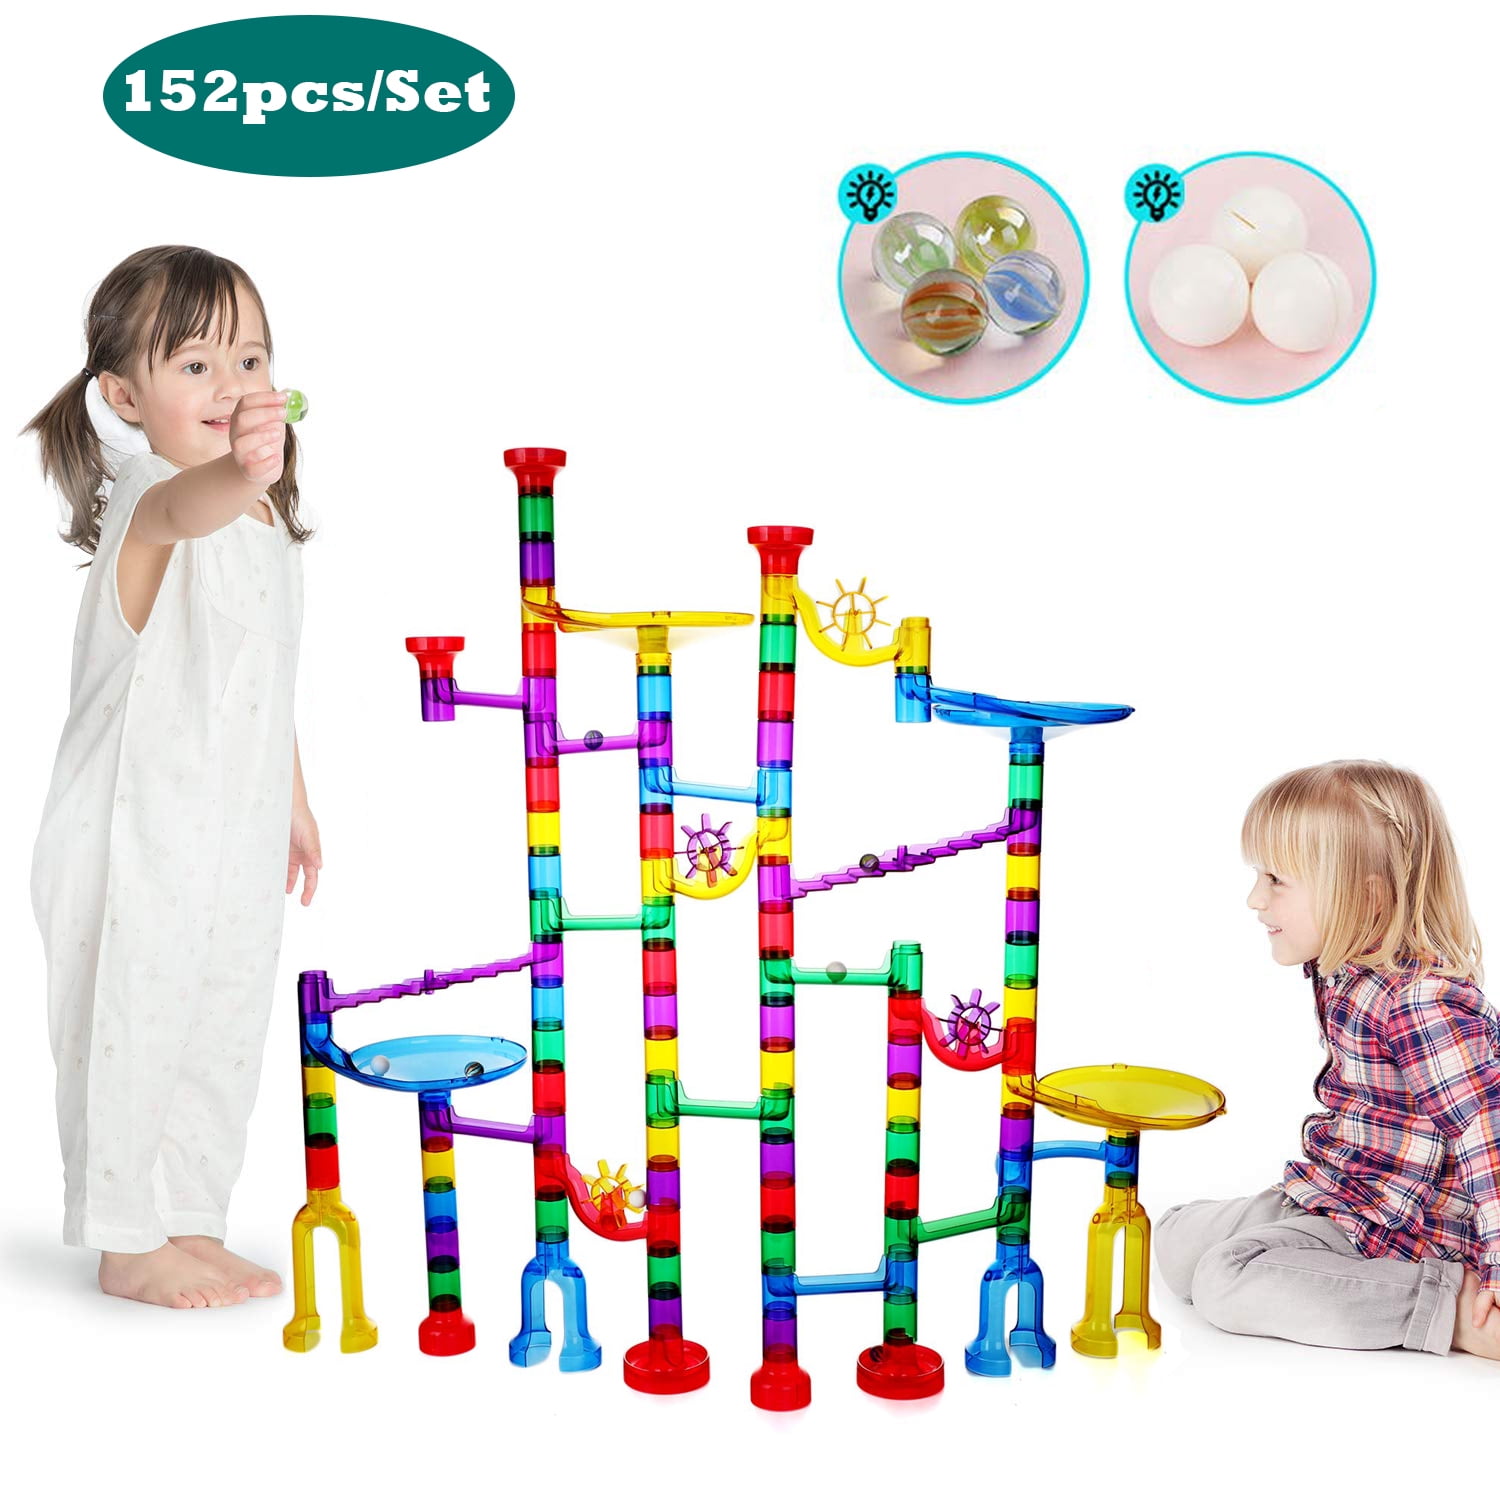 32 Building Pieces Spinning Fun Kids Children Marble Run Toys with 12 Marbles 